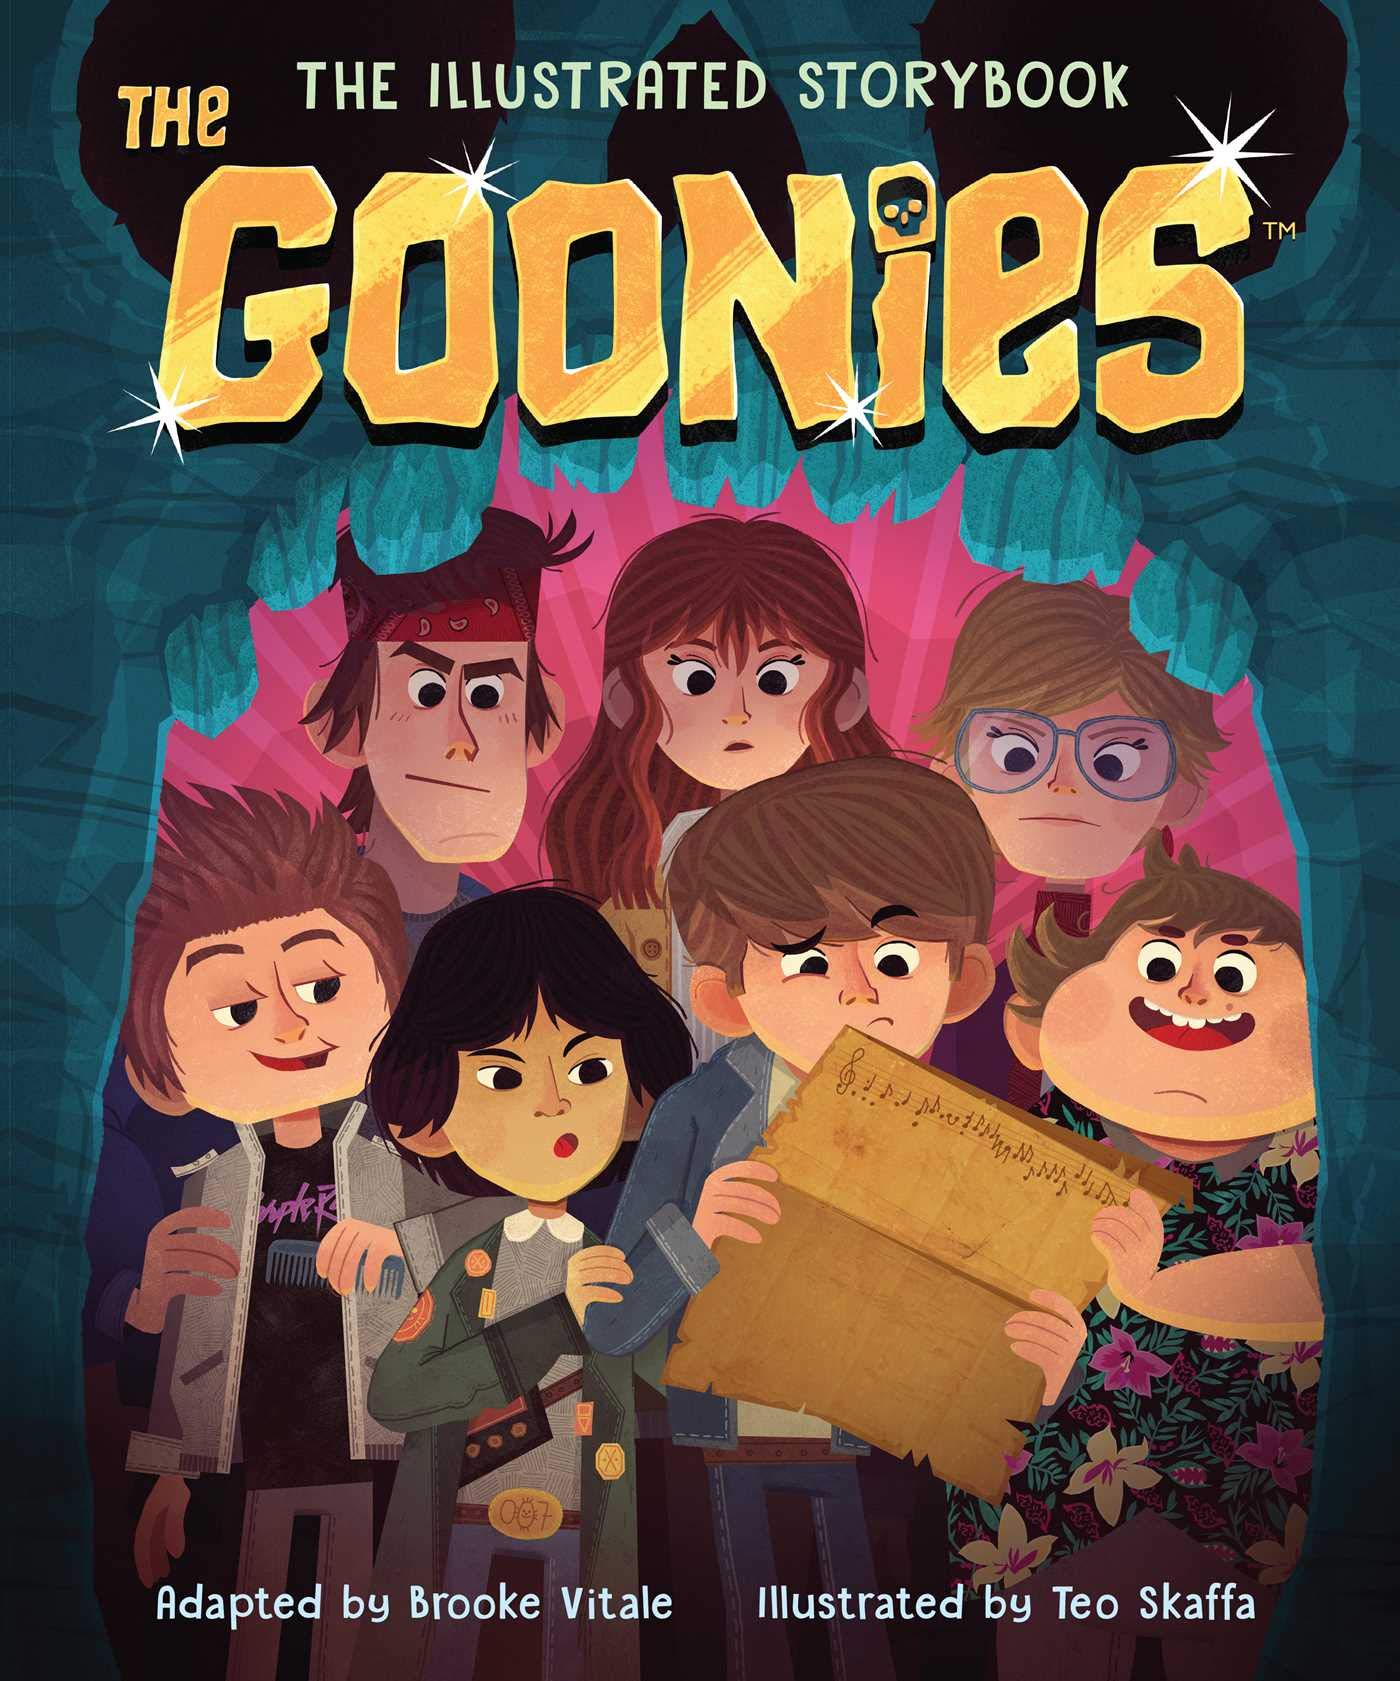 Image for "The Goonies: The Illustrated Storybook"